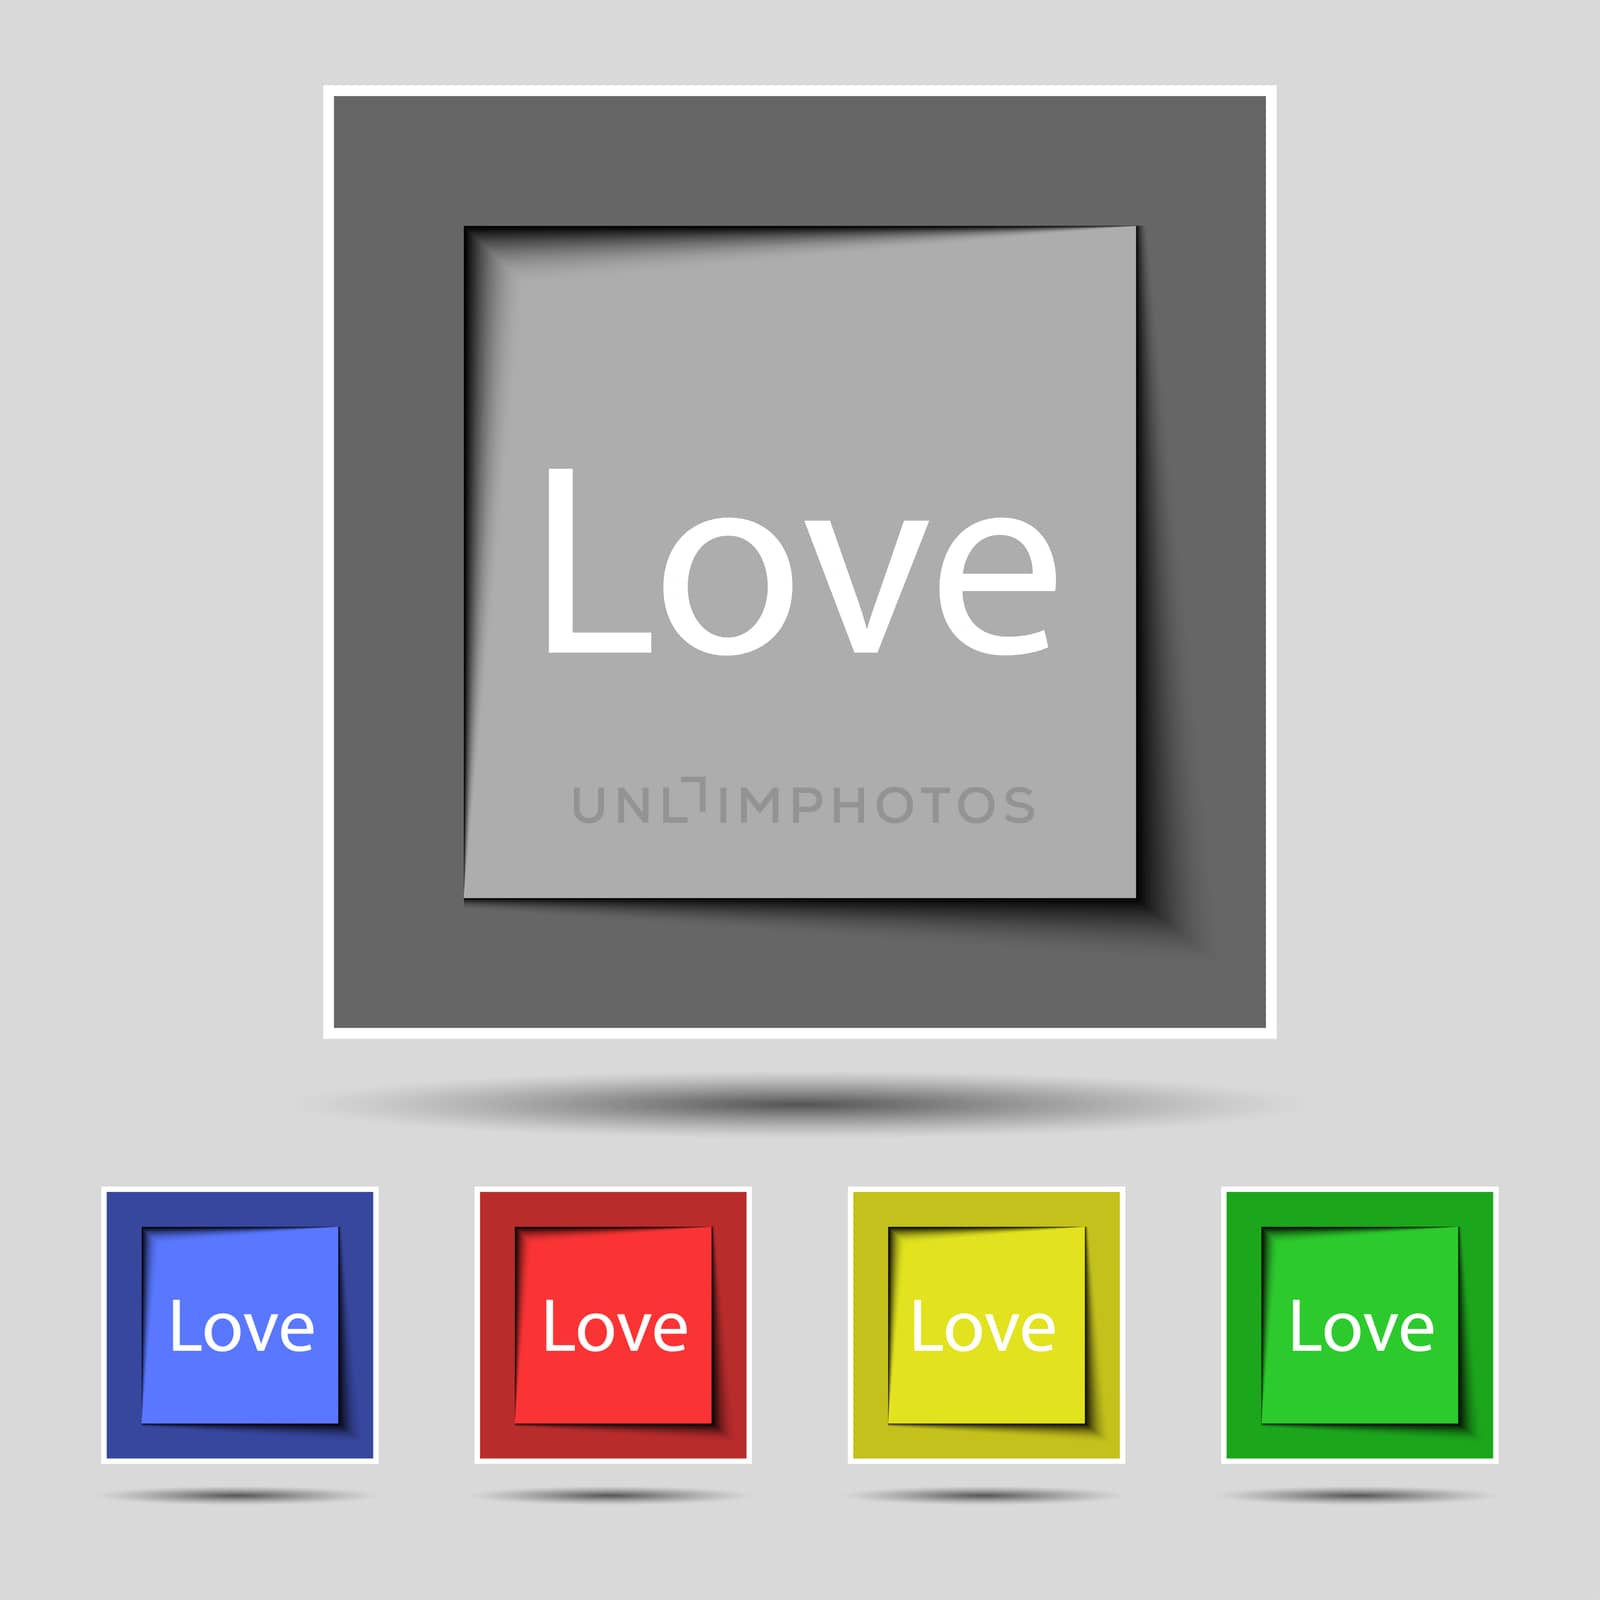 Love you sign icon. Valentines day symbol. Set of colored buttons. illustration